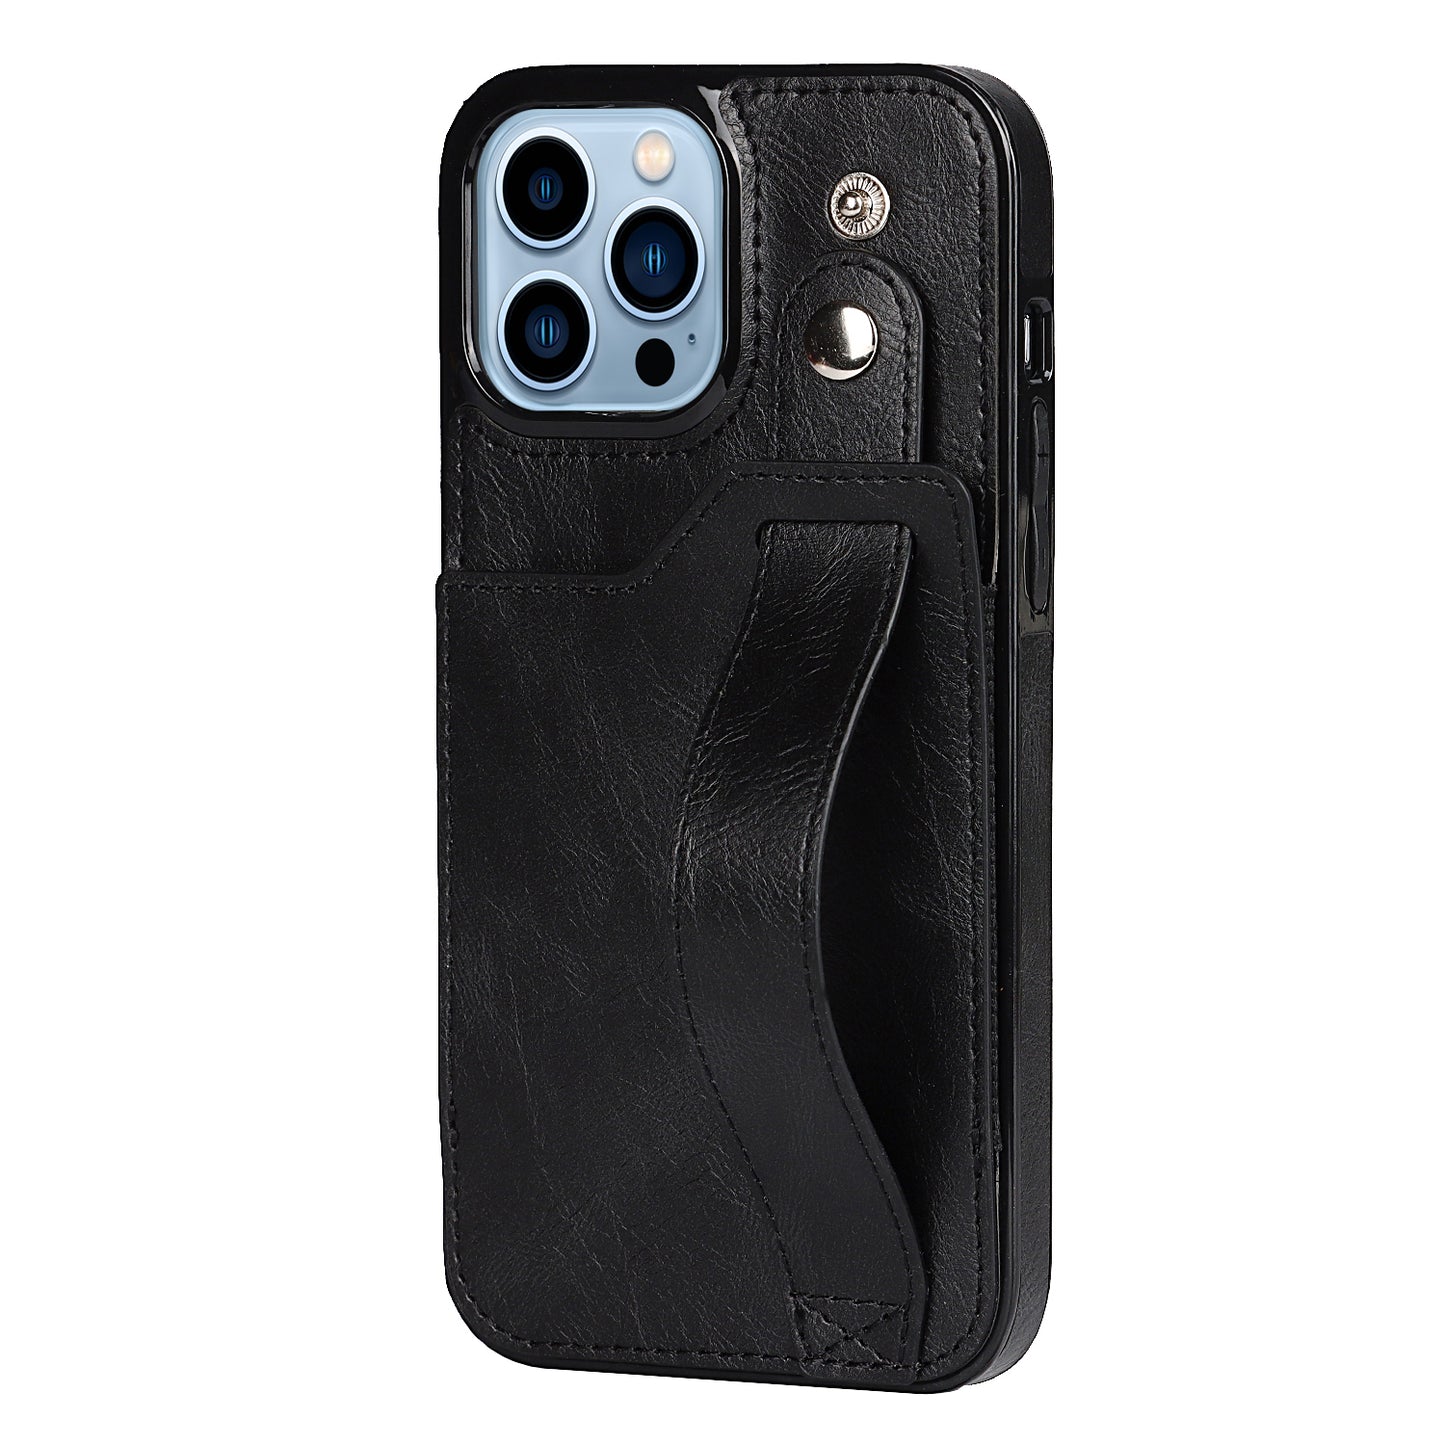 Personalized Genuine Leather iPhone Case with Card Slot and Strap for iPhone 13/ iPhone 12/ iPhone 11/ iPhone XS/ iPhone 8/ iPhone 7